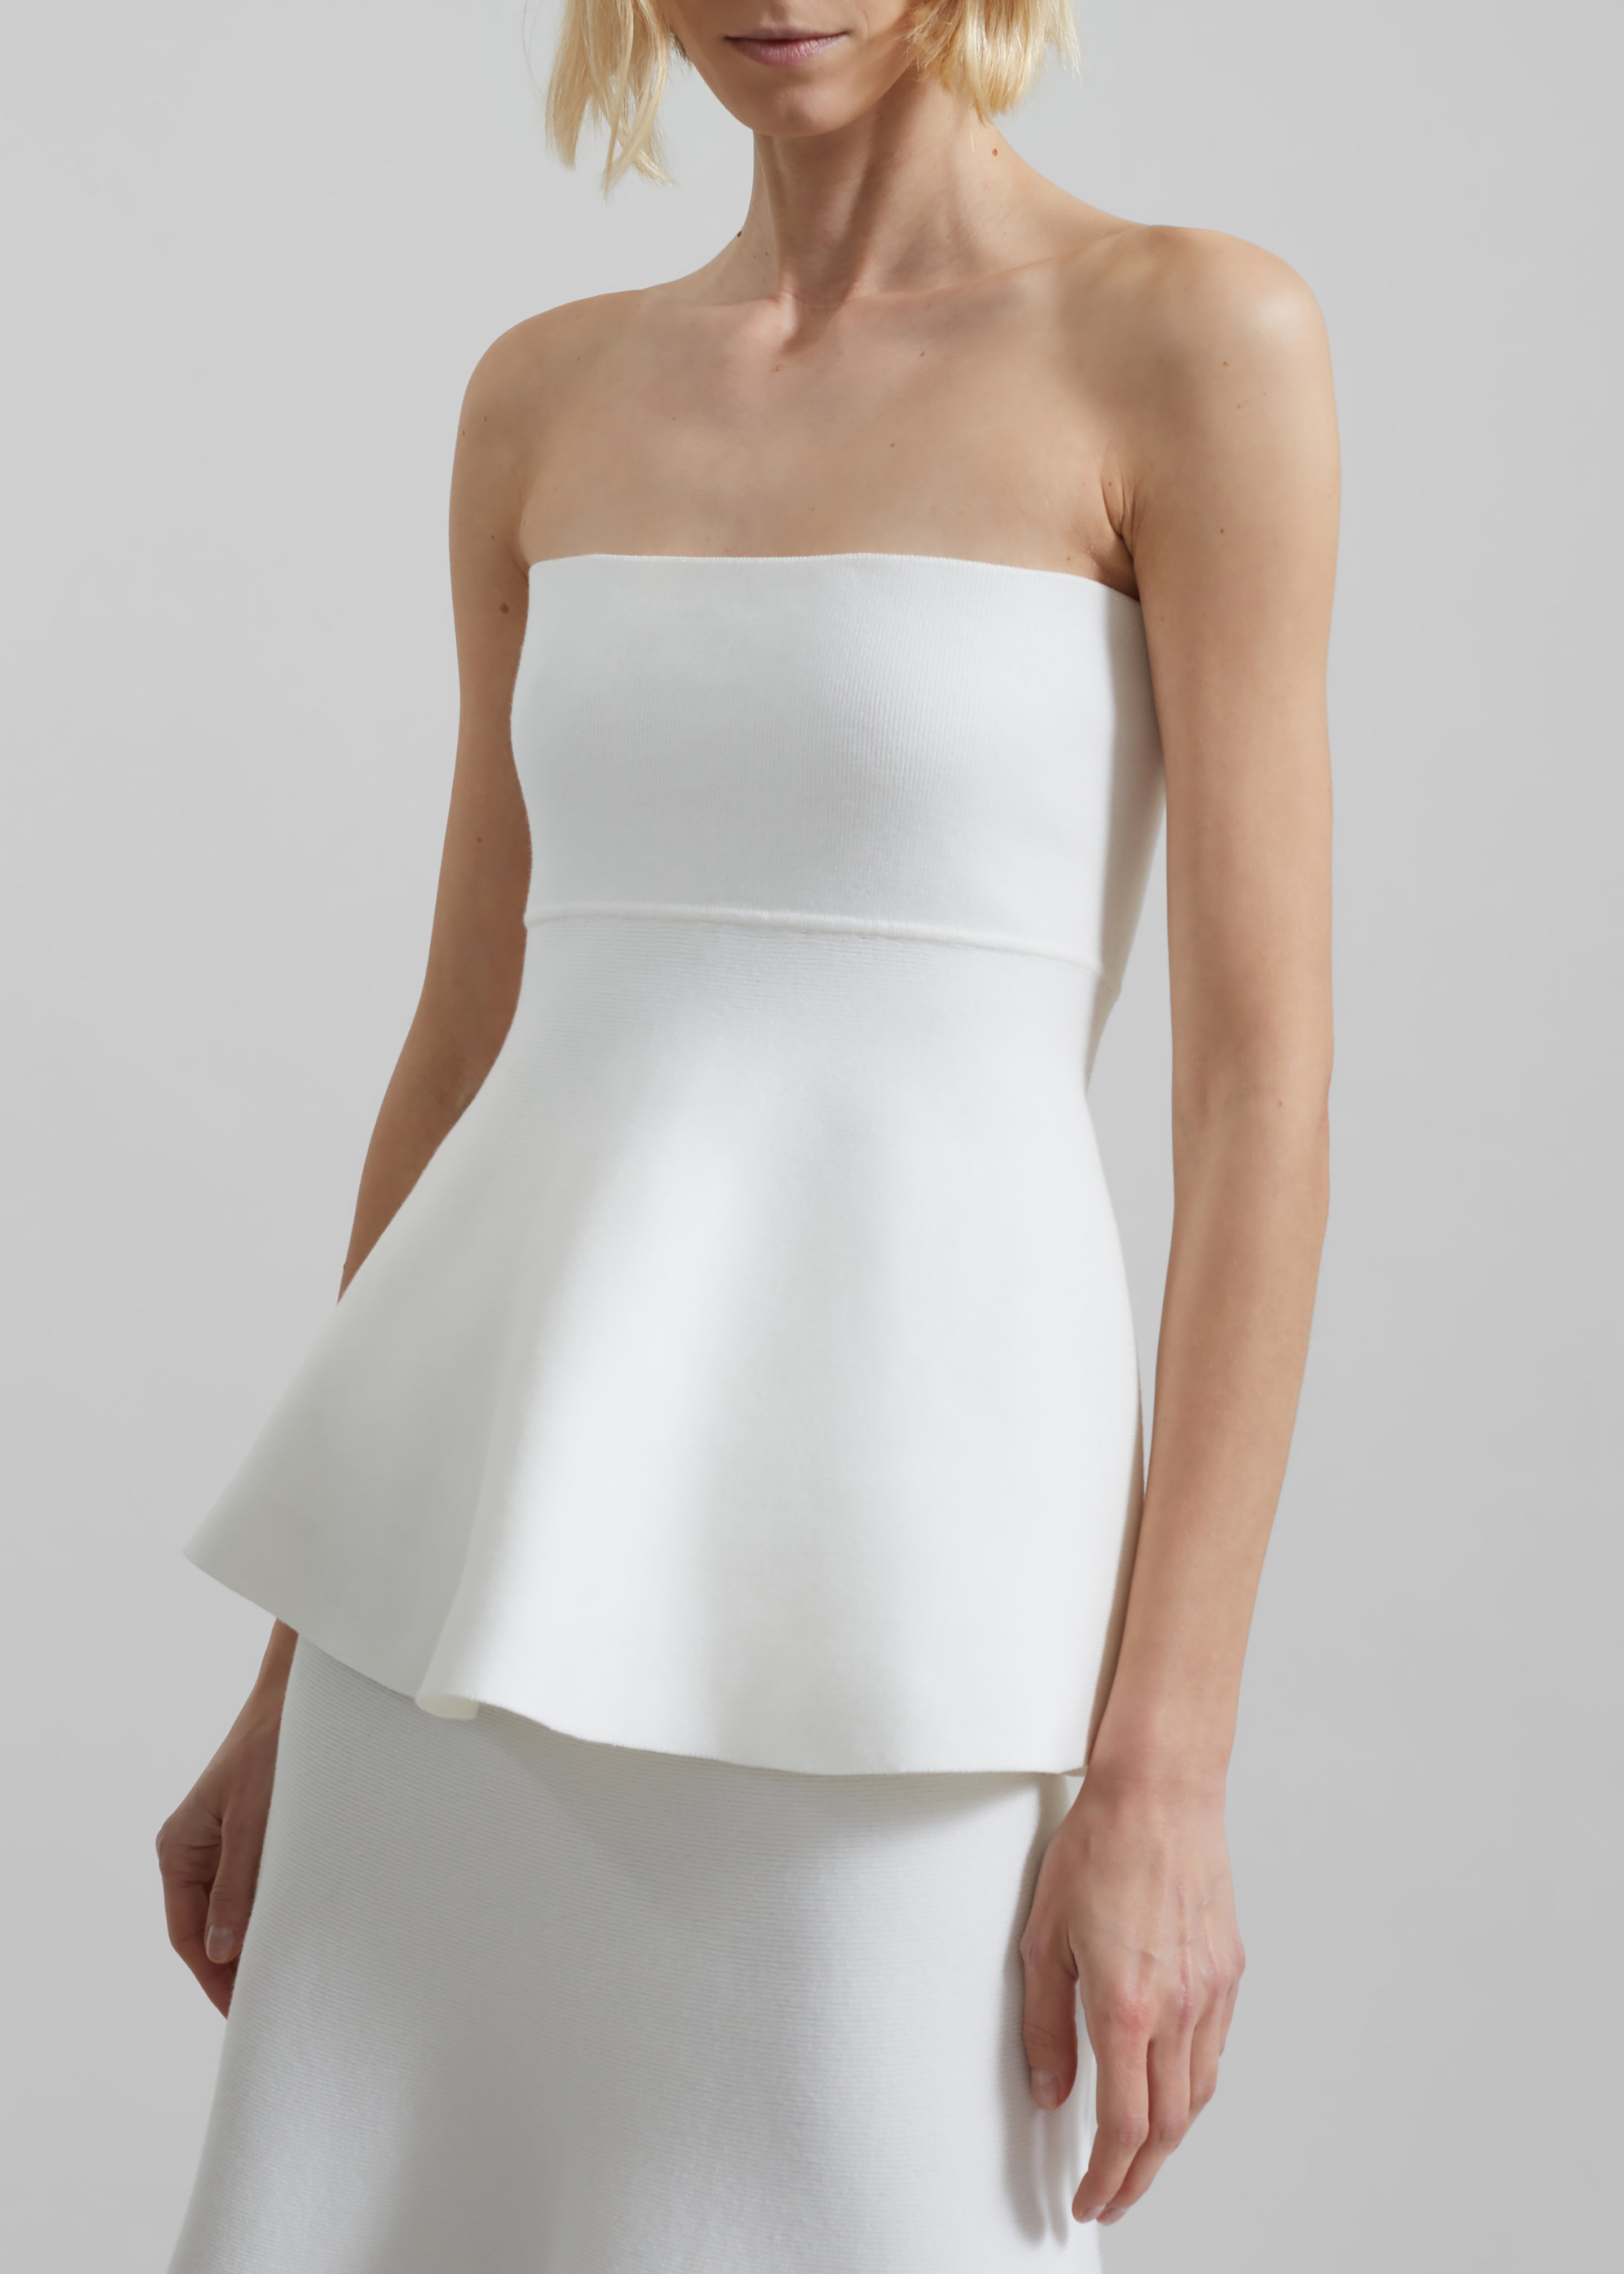 Agathe Knit Bustier - Off White - 3